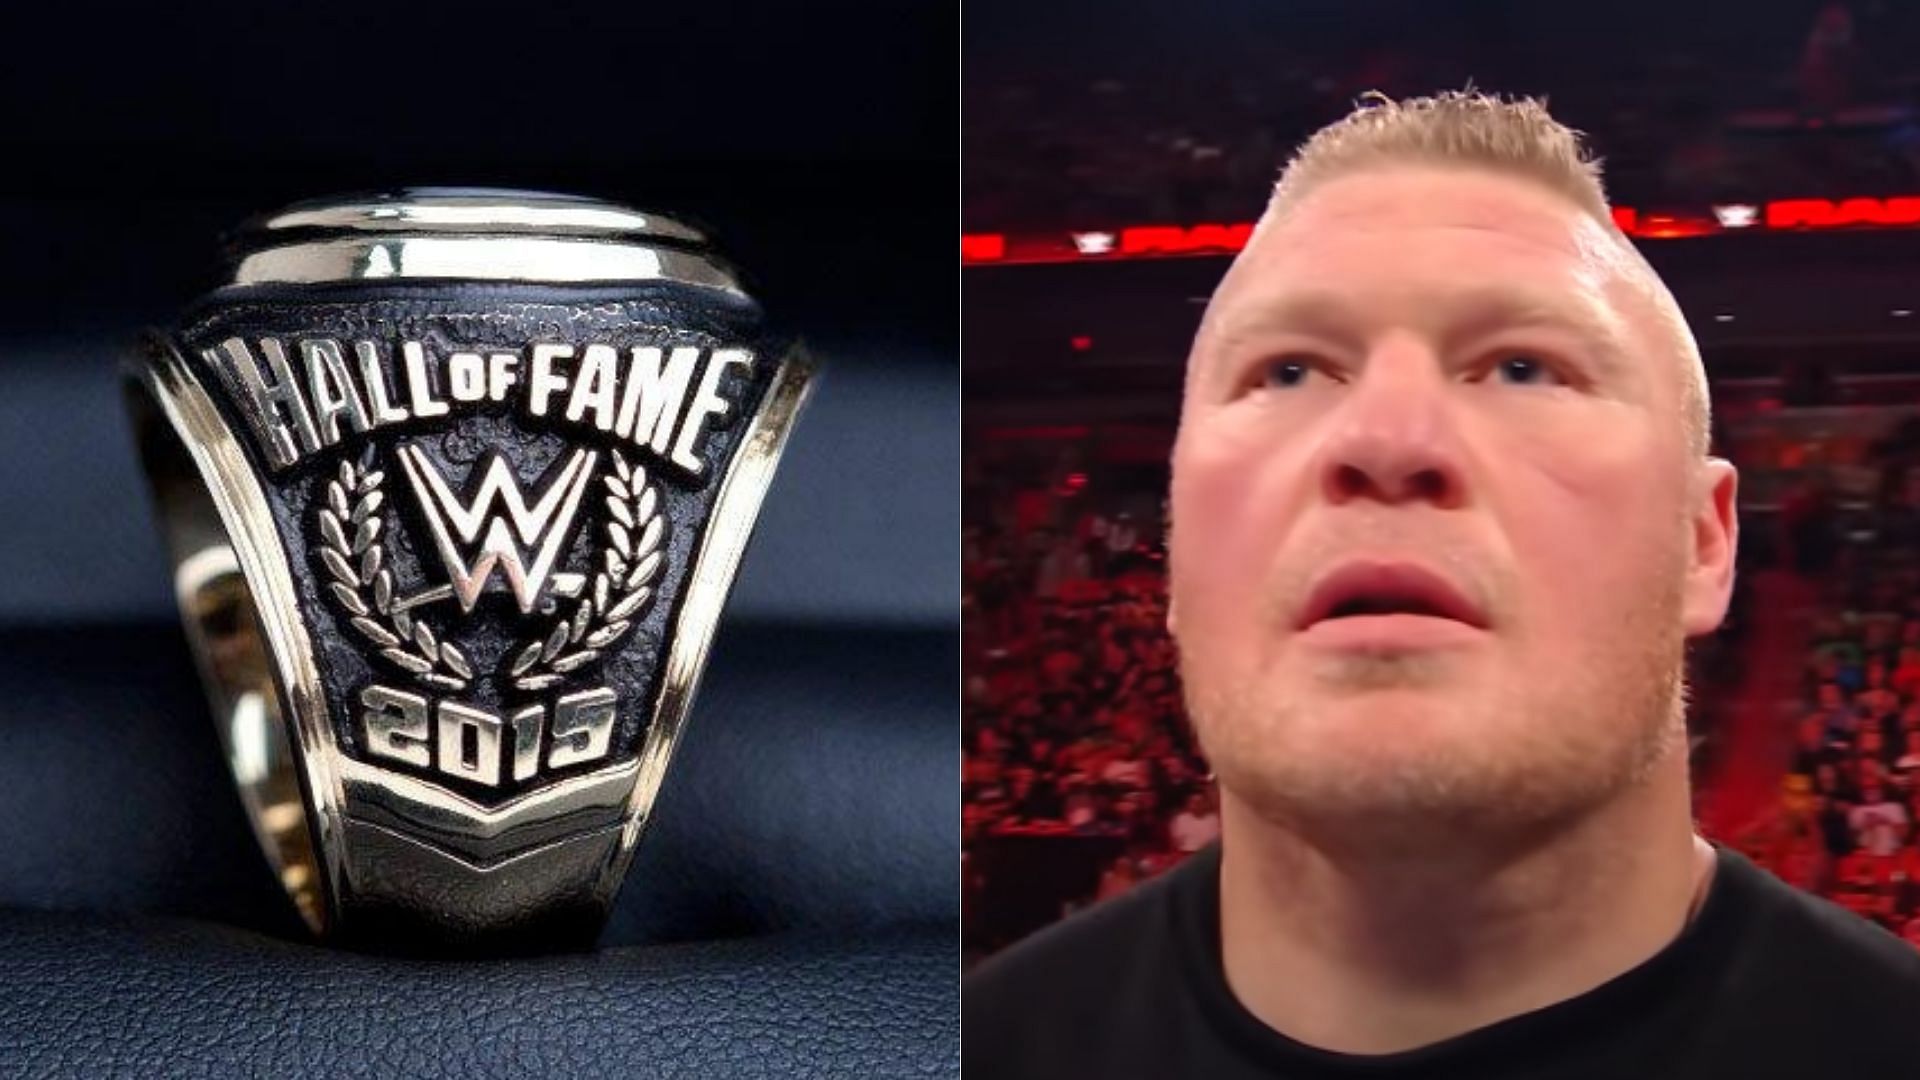 WWE Hall of Fame Class of 2015 ring (left); Brock Lesnar (right)